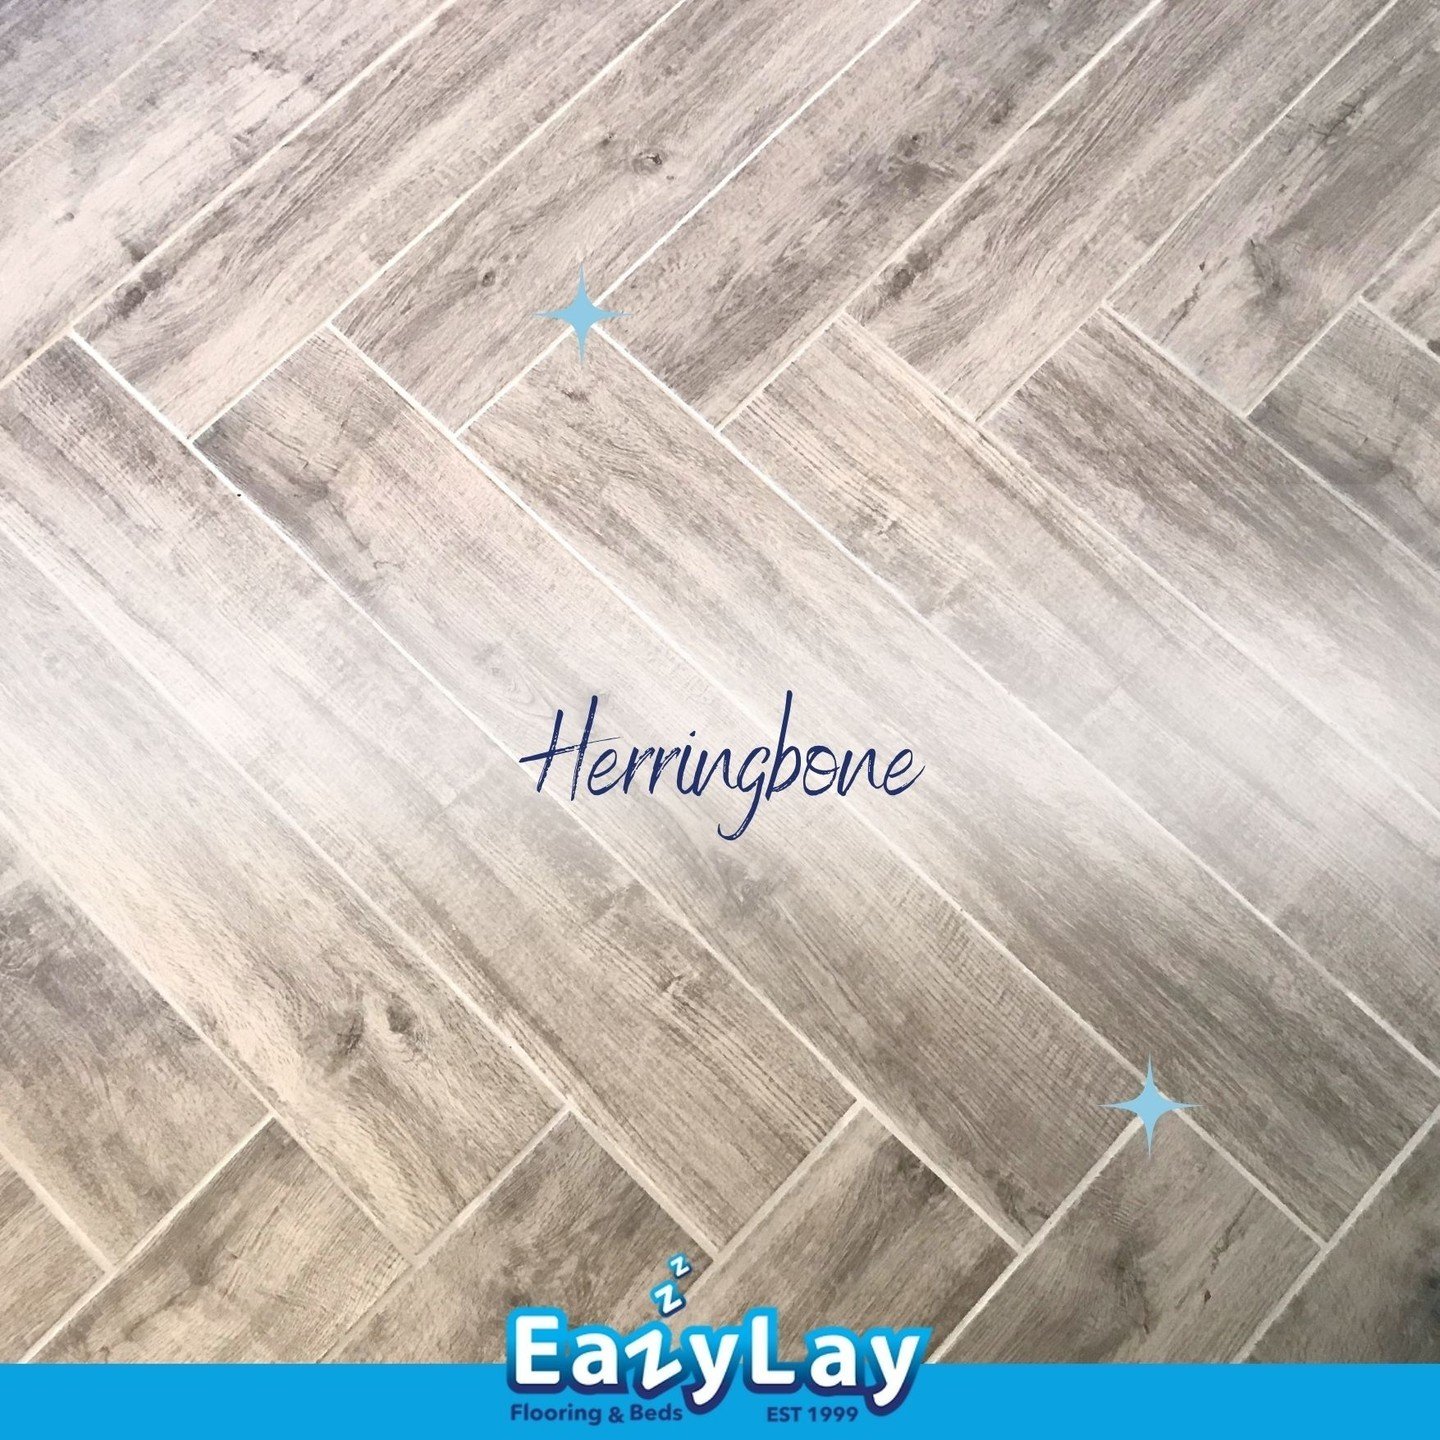 Embrace the timeless elegance of herringbone flooring with a modern twist! Our LVT option offers all the sophistication of wood, without the upkeep. Discover the perfect blend of style and convenience. #HerringboneFlooring #ModernTwist #LVT